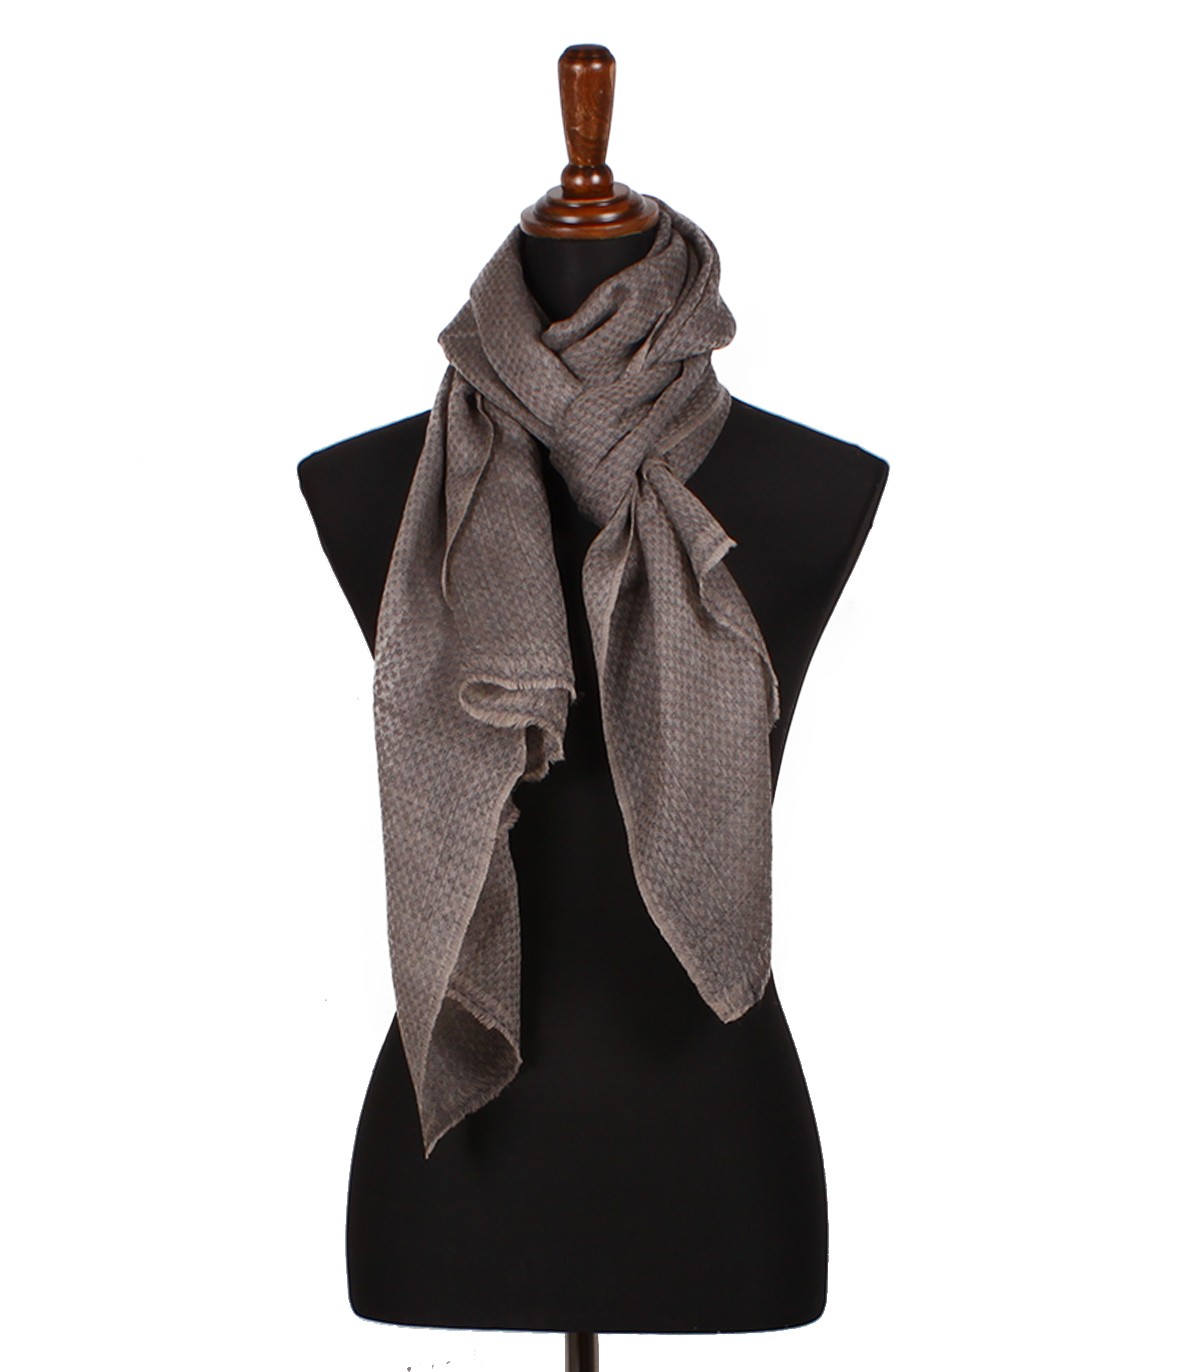 Authentic Grey Cashmere Shawls From Nepal| Buy Pashmina Shawls and ...